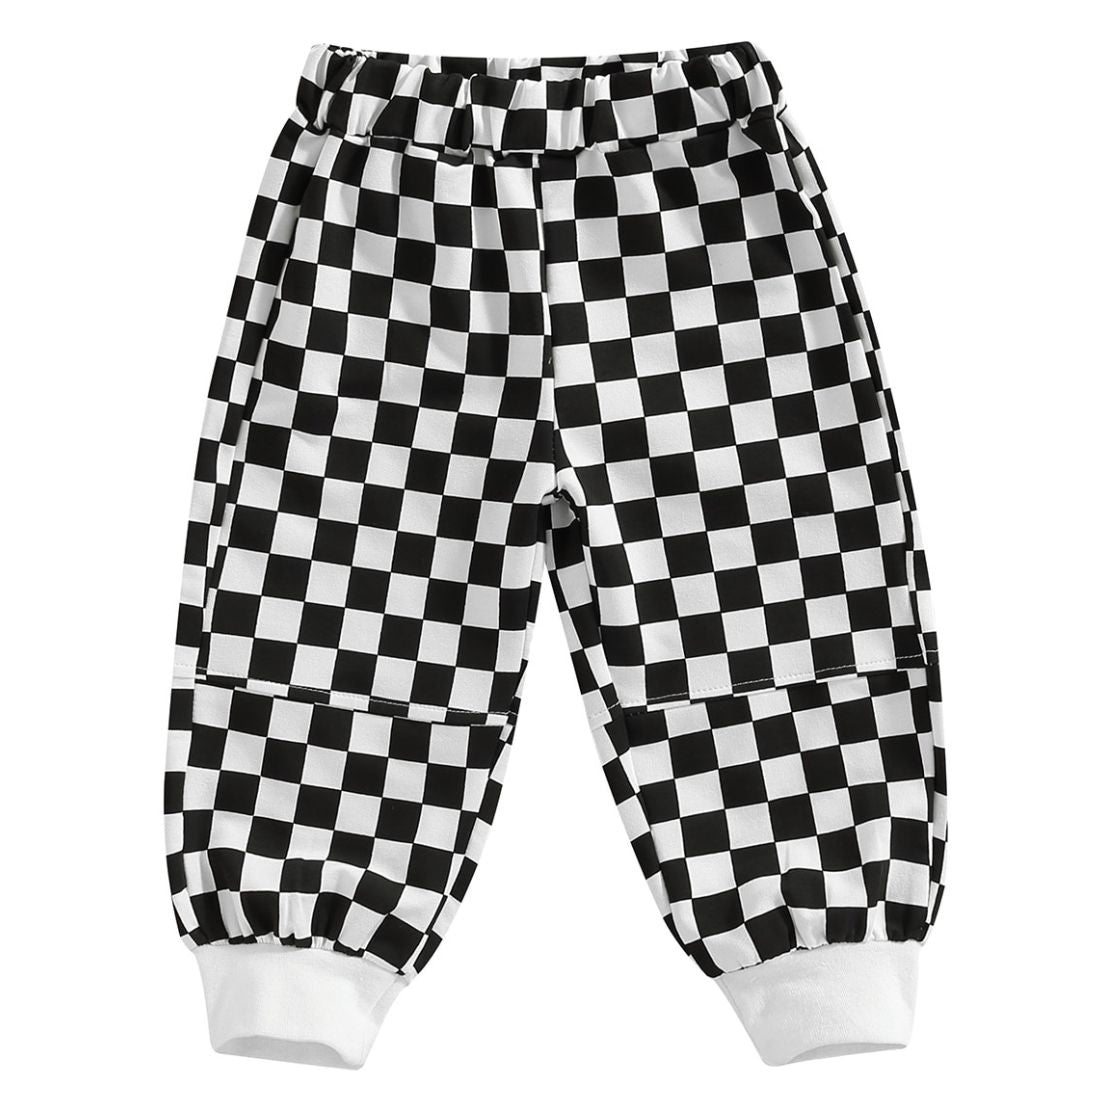 Toddler Boy Checkers Retro Street Pants - My Trendy Youngsters | Buy on-trend and stylish Baby and Toddler Clothing Sets @ My Trendy Youngsters - Dress your little one in Style @ My Trendy Youngsters 